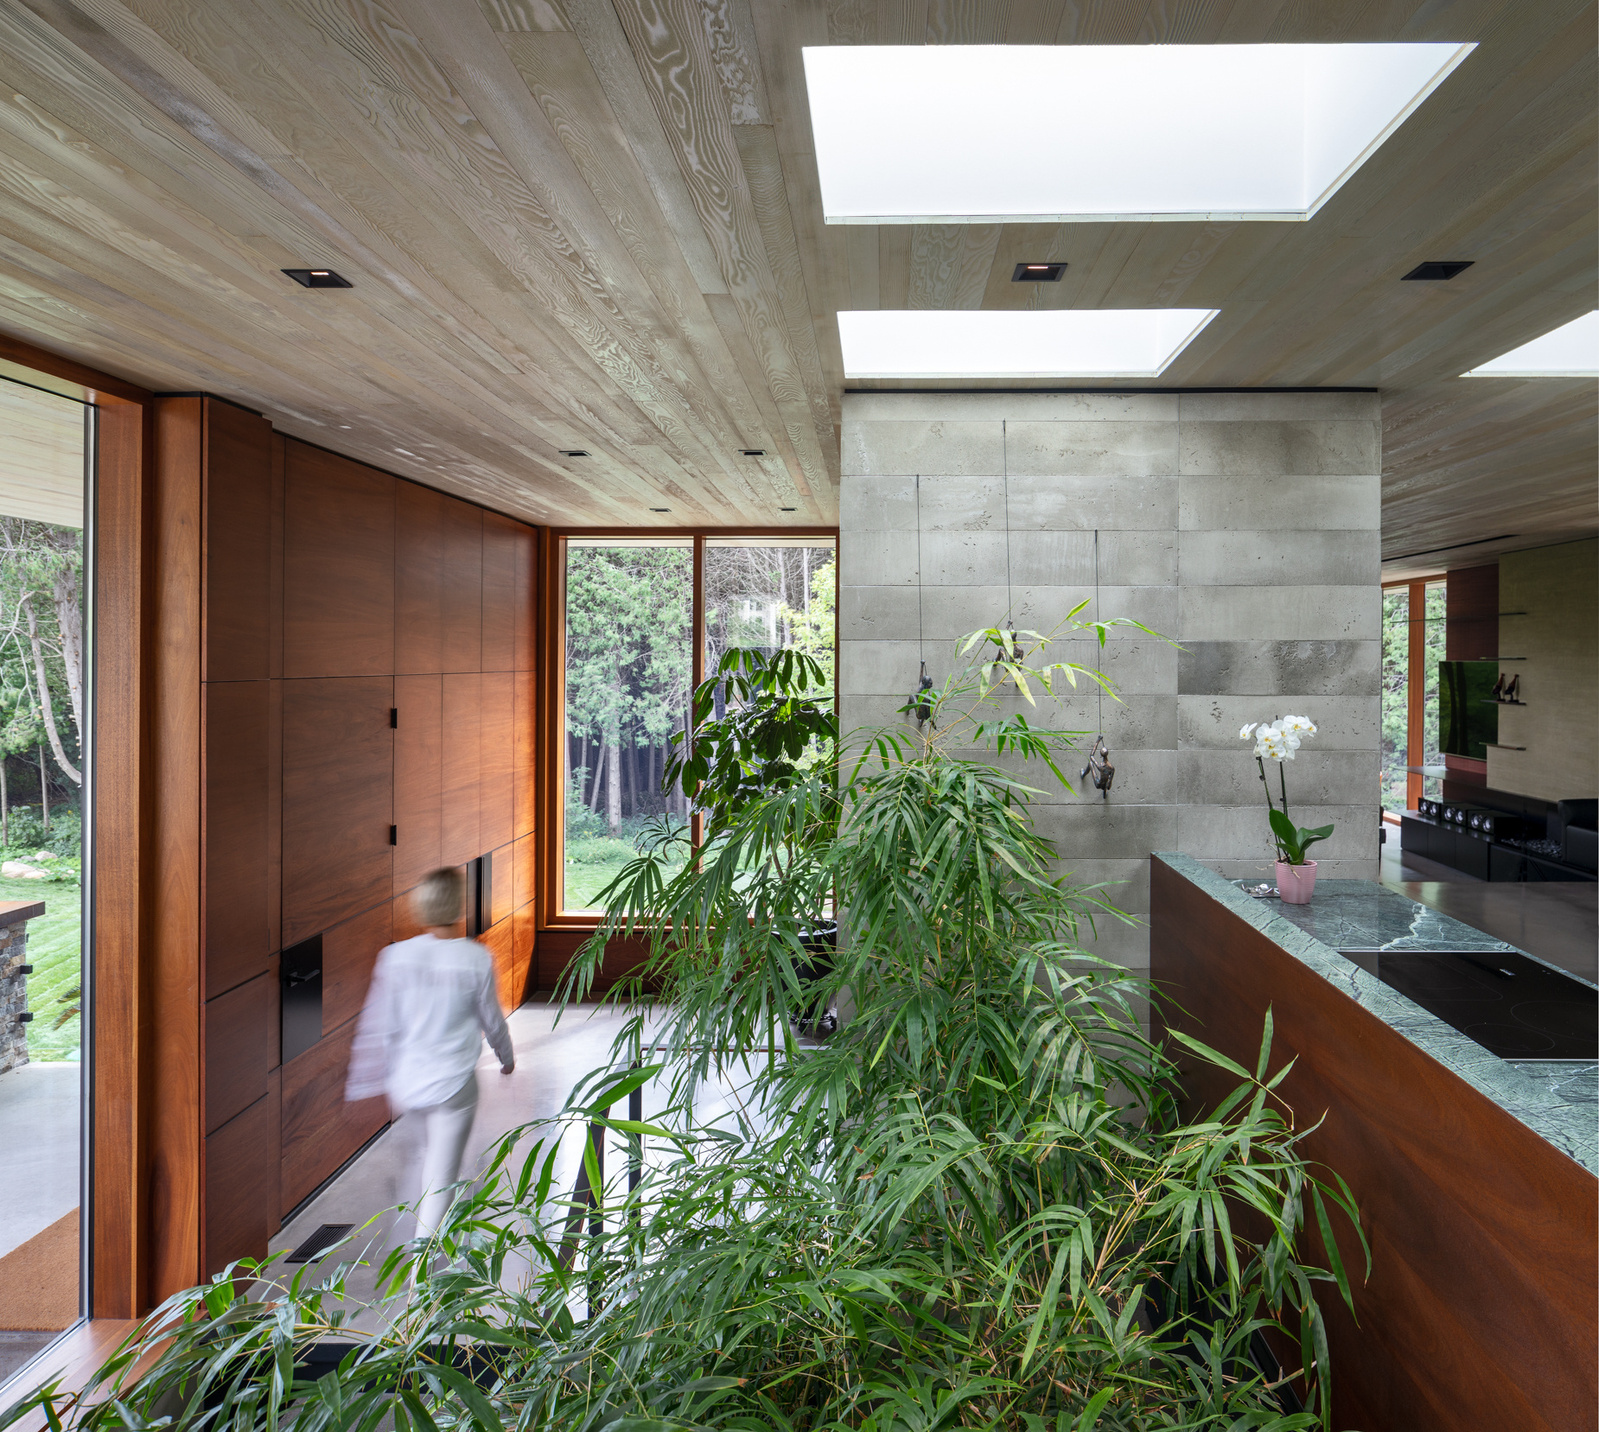 Architect Trevor McIvor says thought and execution went into the recently completed home known as Petaluma House, whose signature feature is an atrium adorned with bamboo trees that draws natural light into the lower levels of the dwelling. 